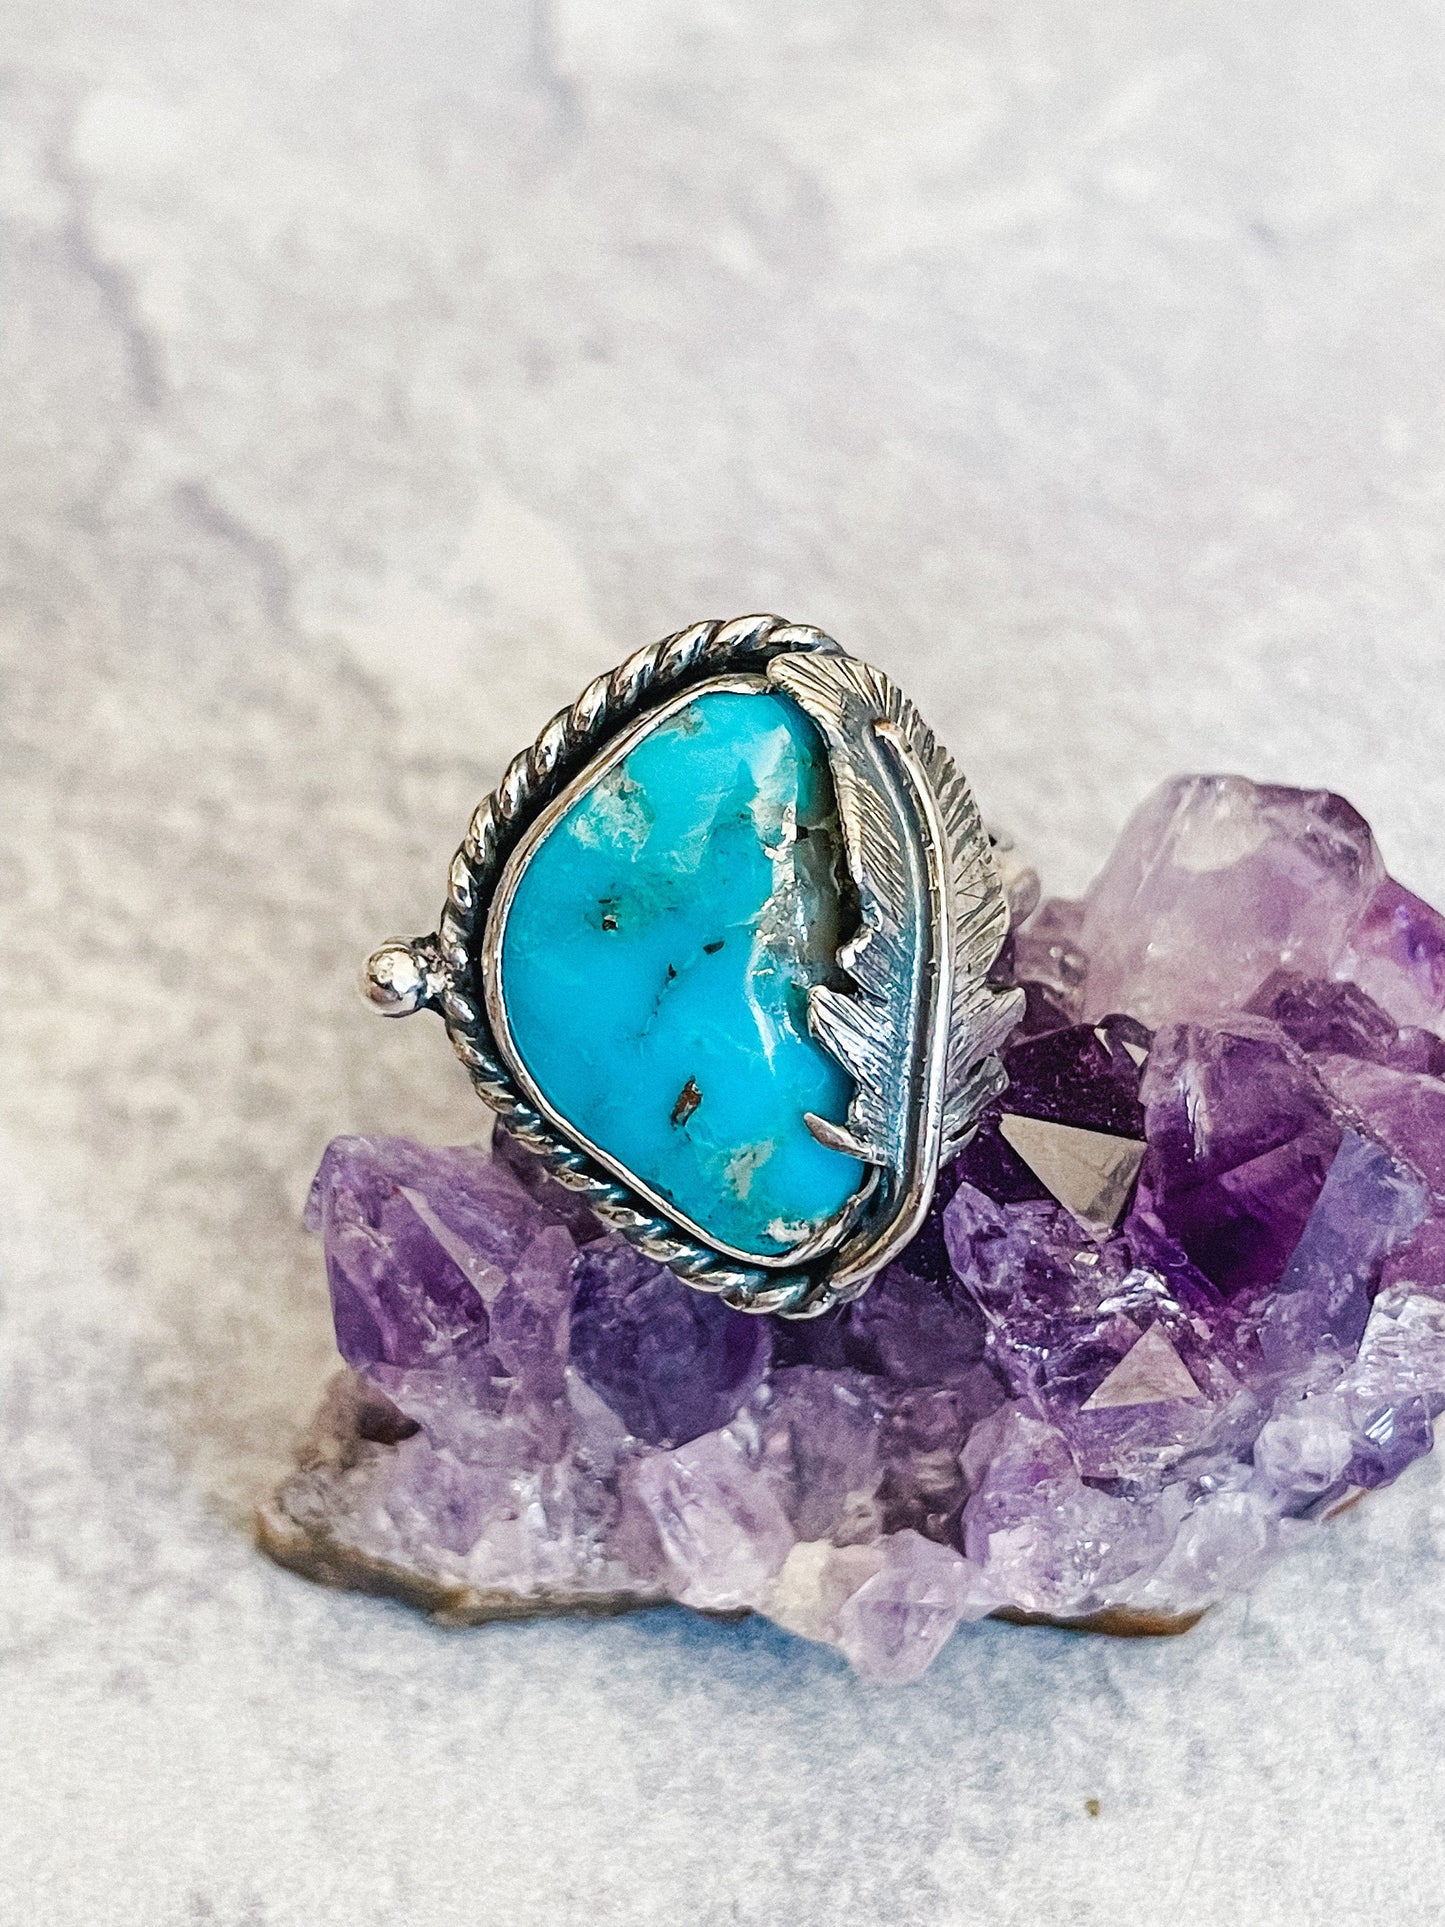 Turquoise Sterling Silver Statement Ring Size 8.5